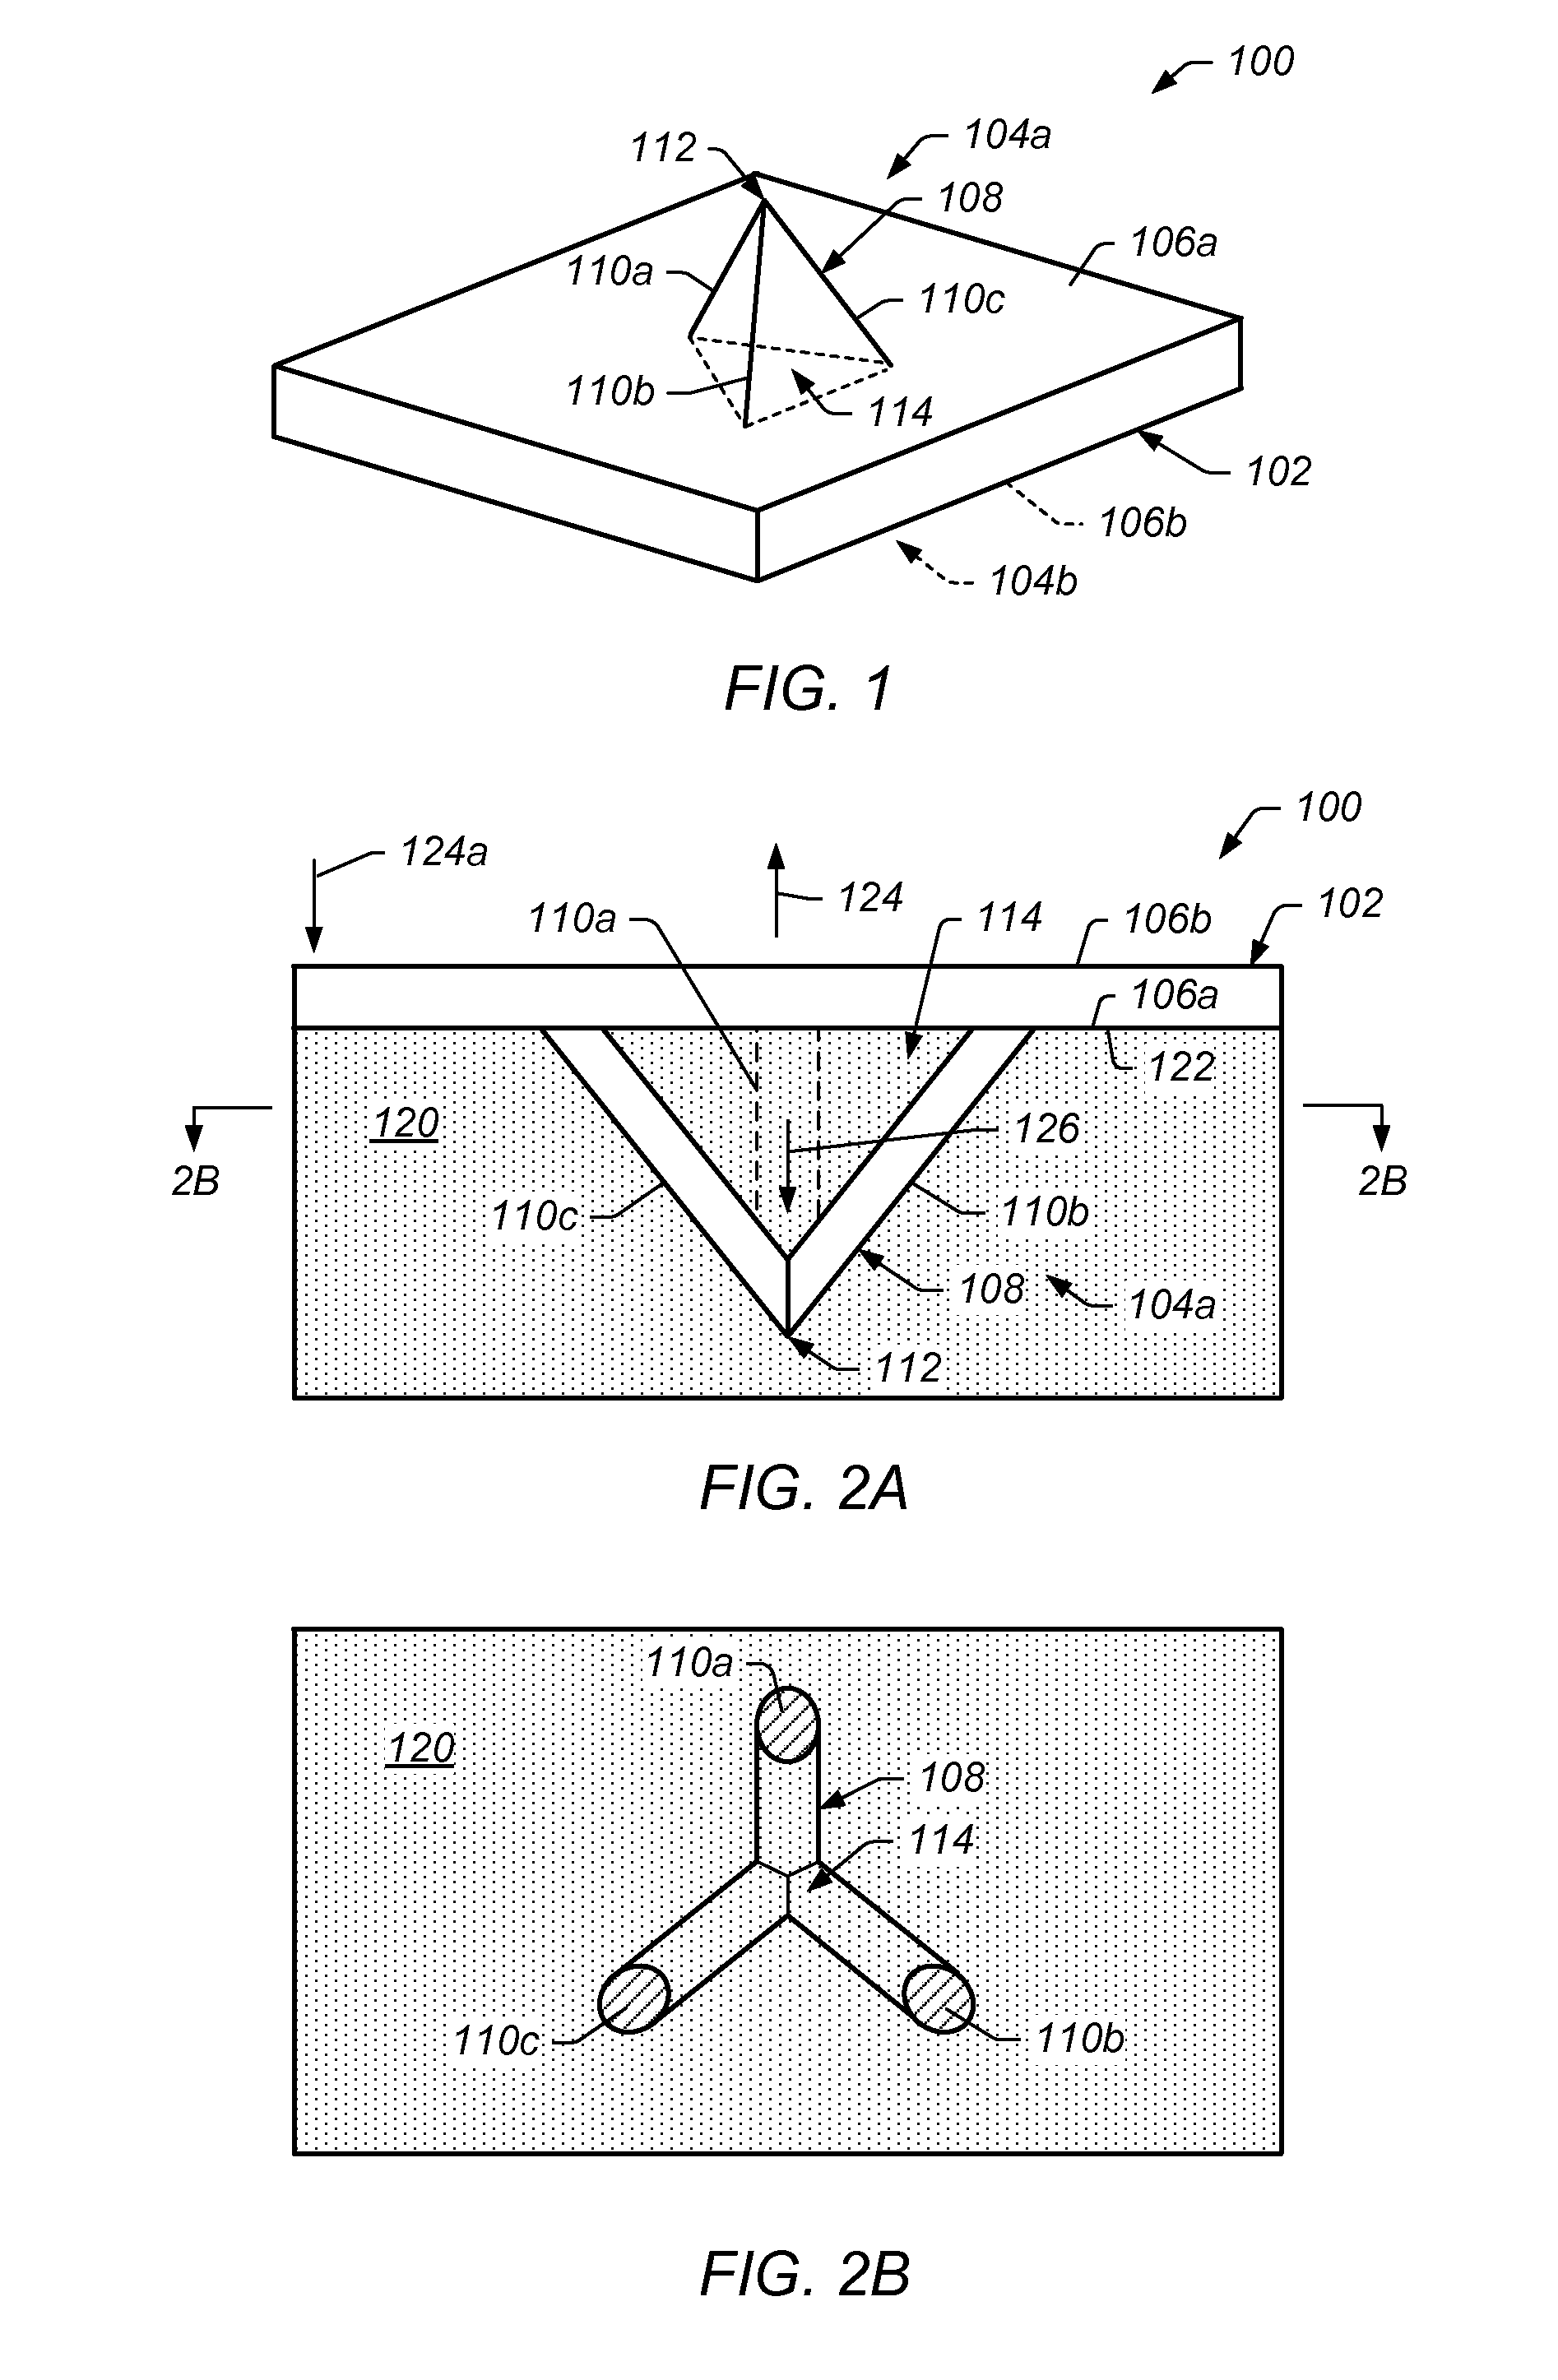 Bone implant interface system and method